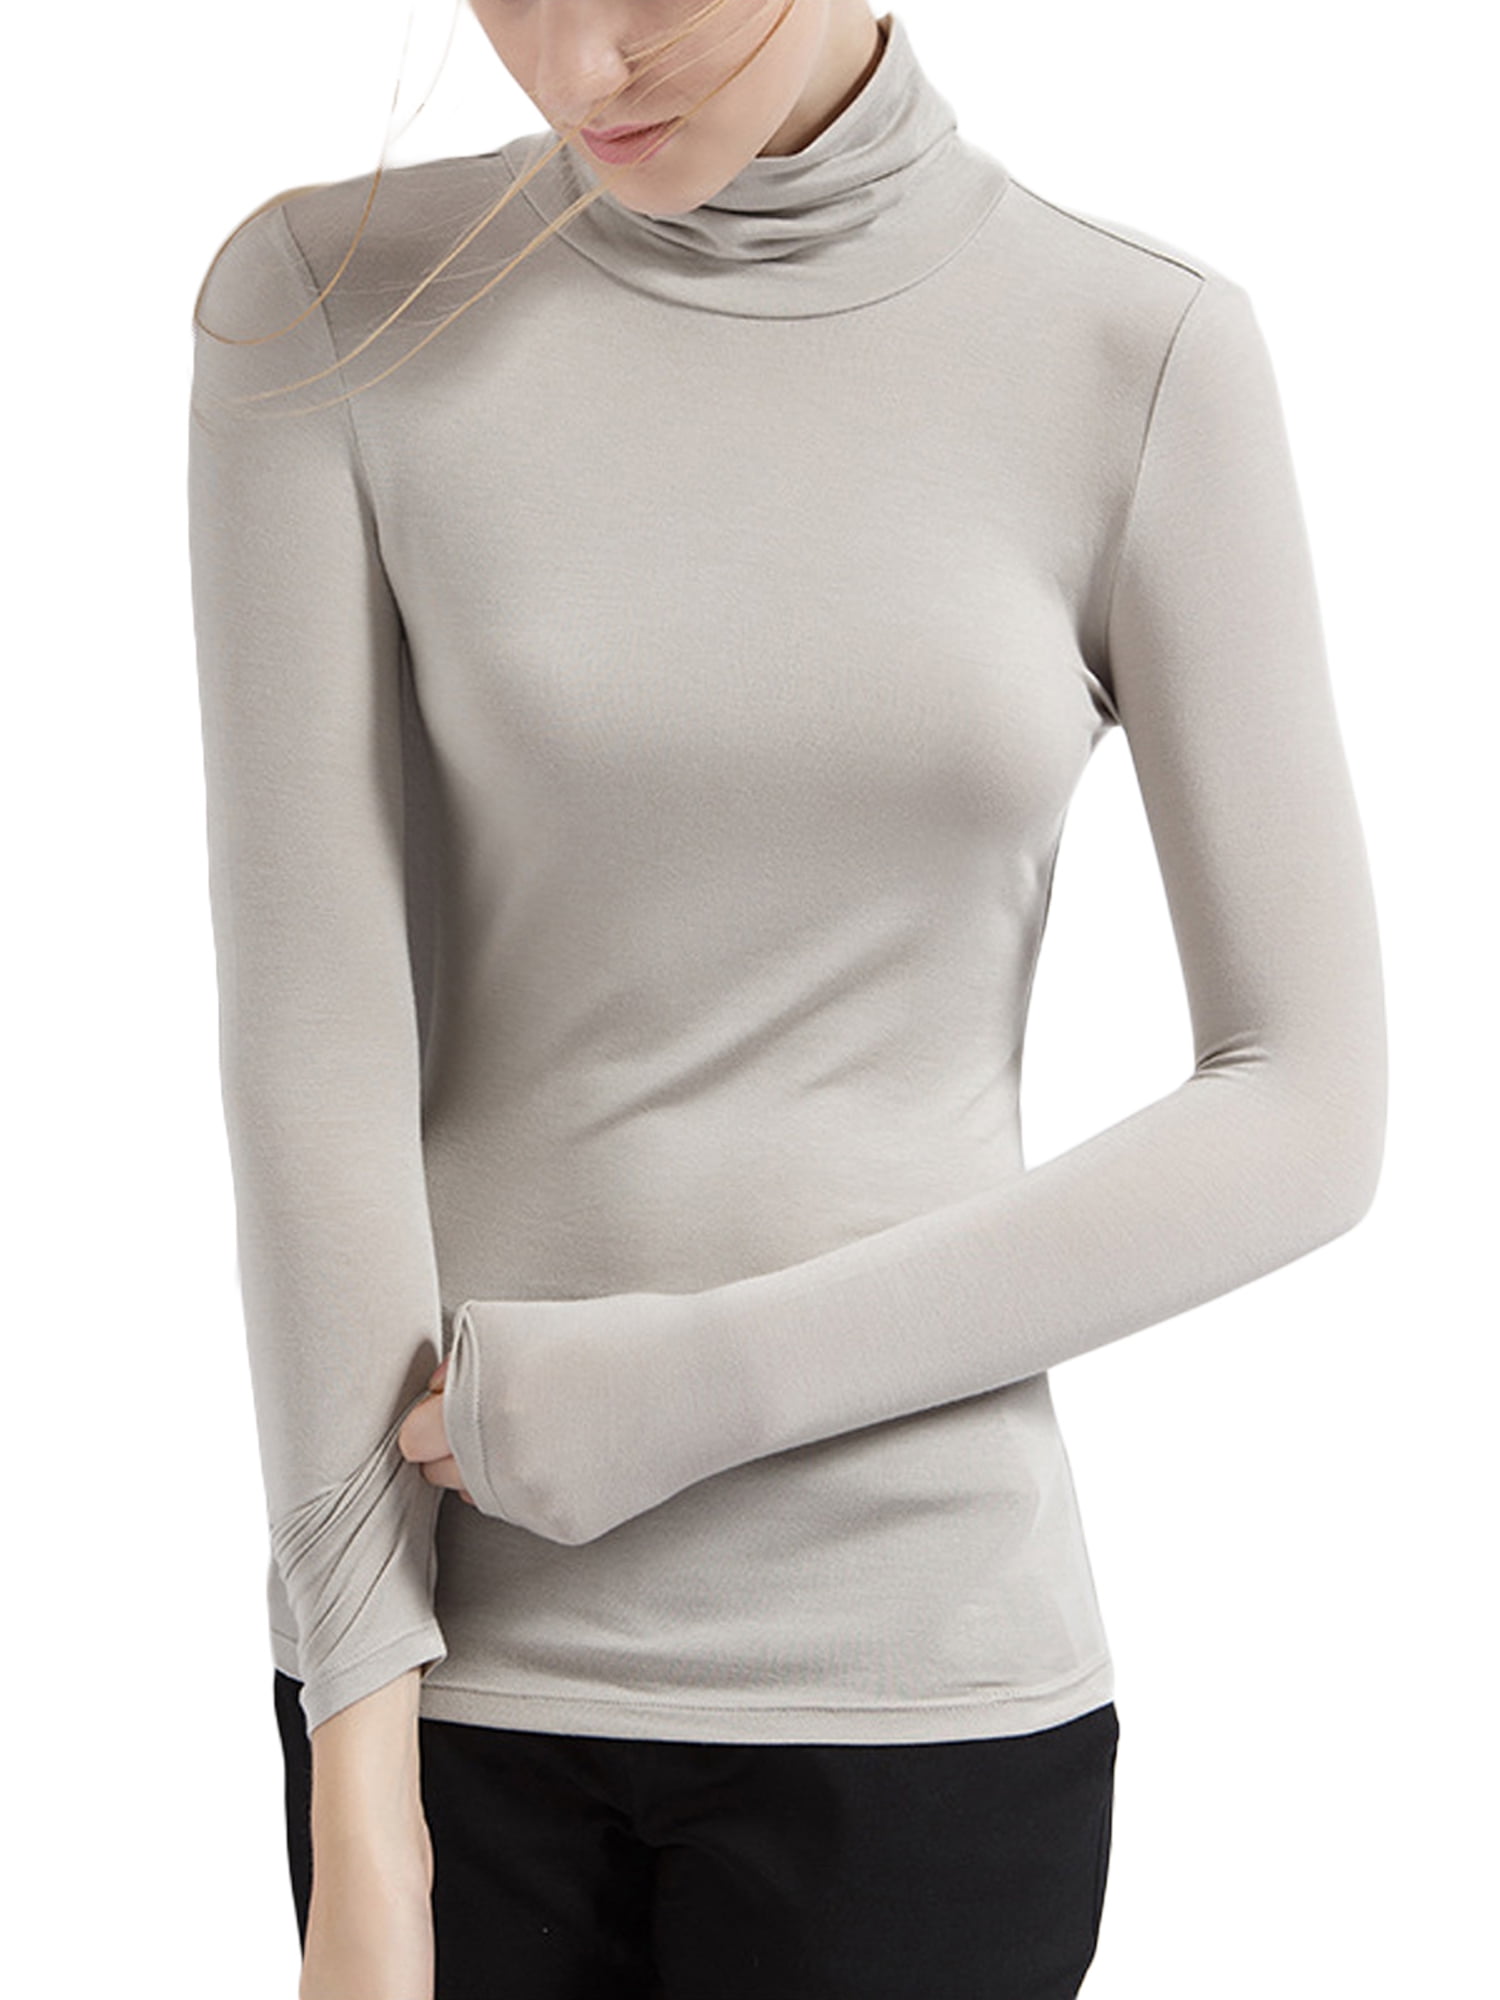 APRLL Womens Turtleneck Long Sleeve Shirts Slim Fitted Soft